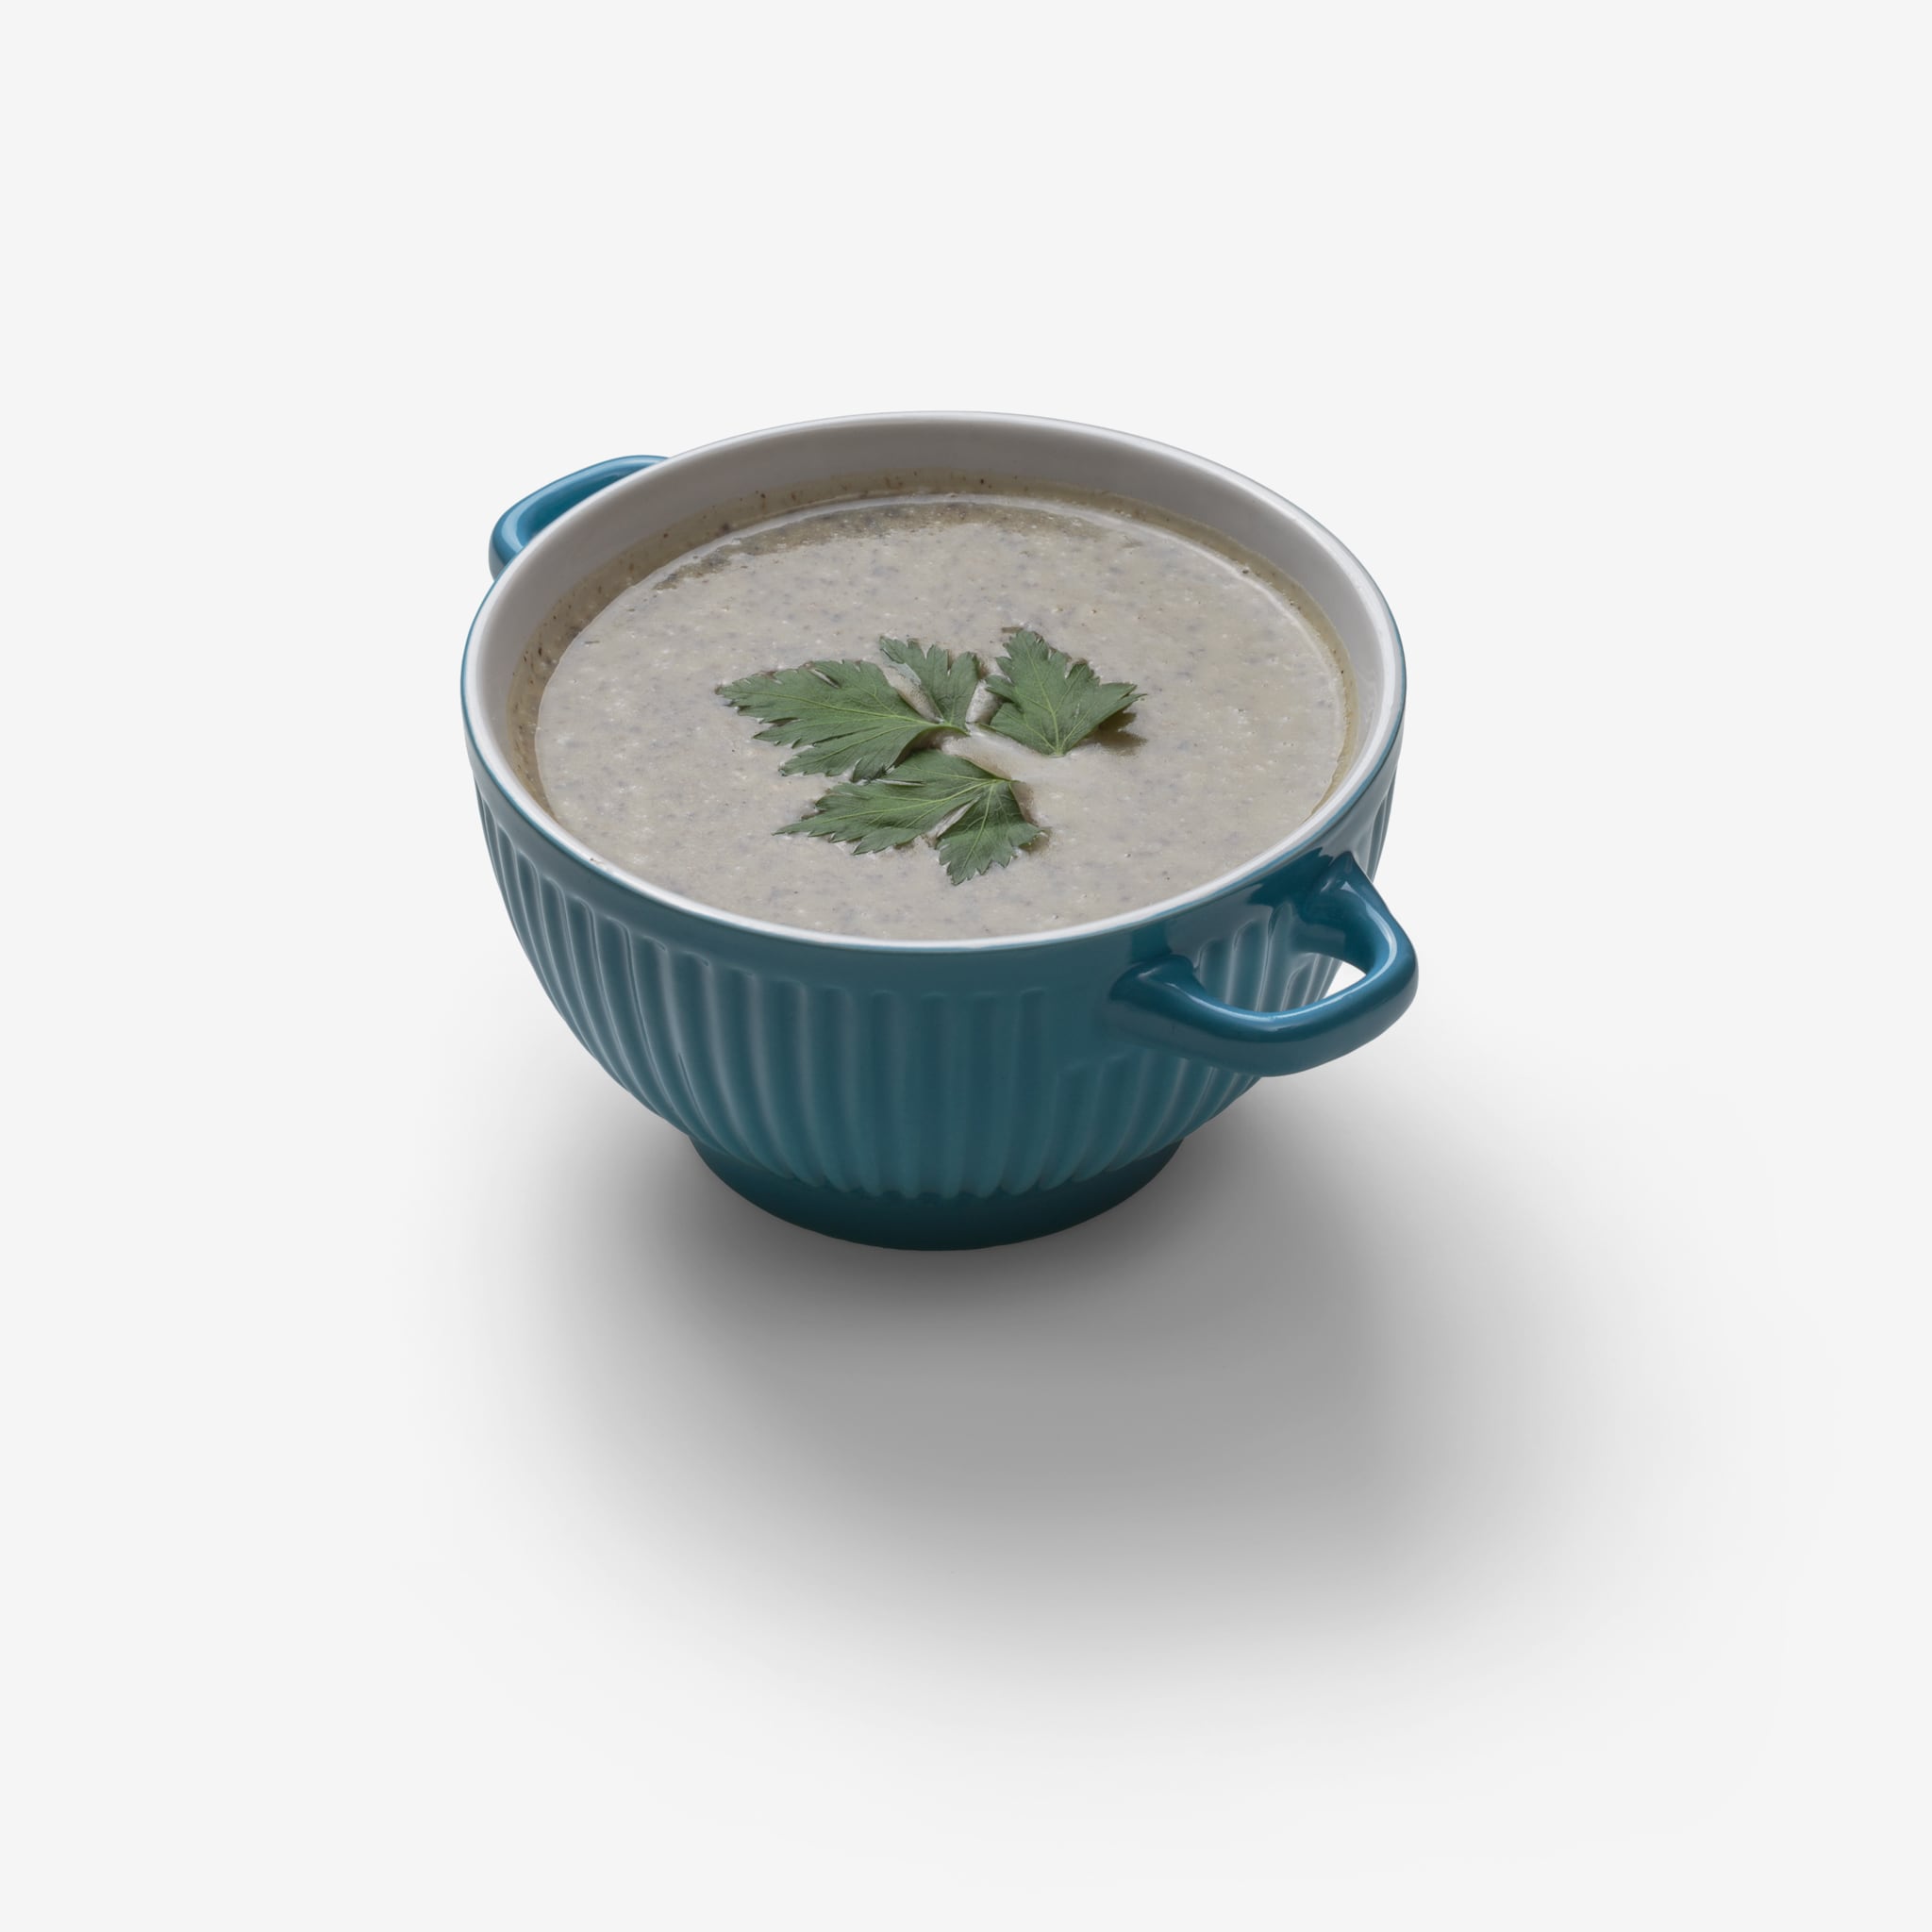 Soup image with transparent background